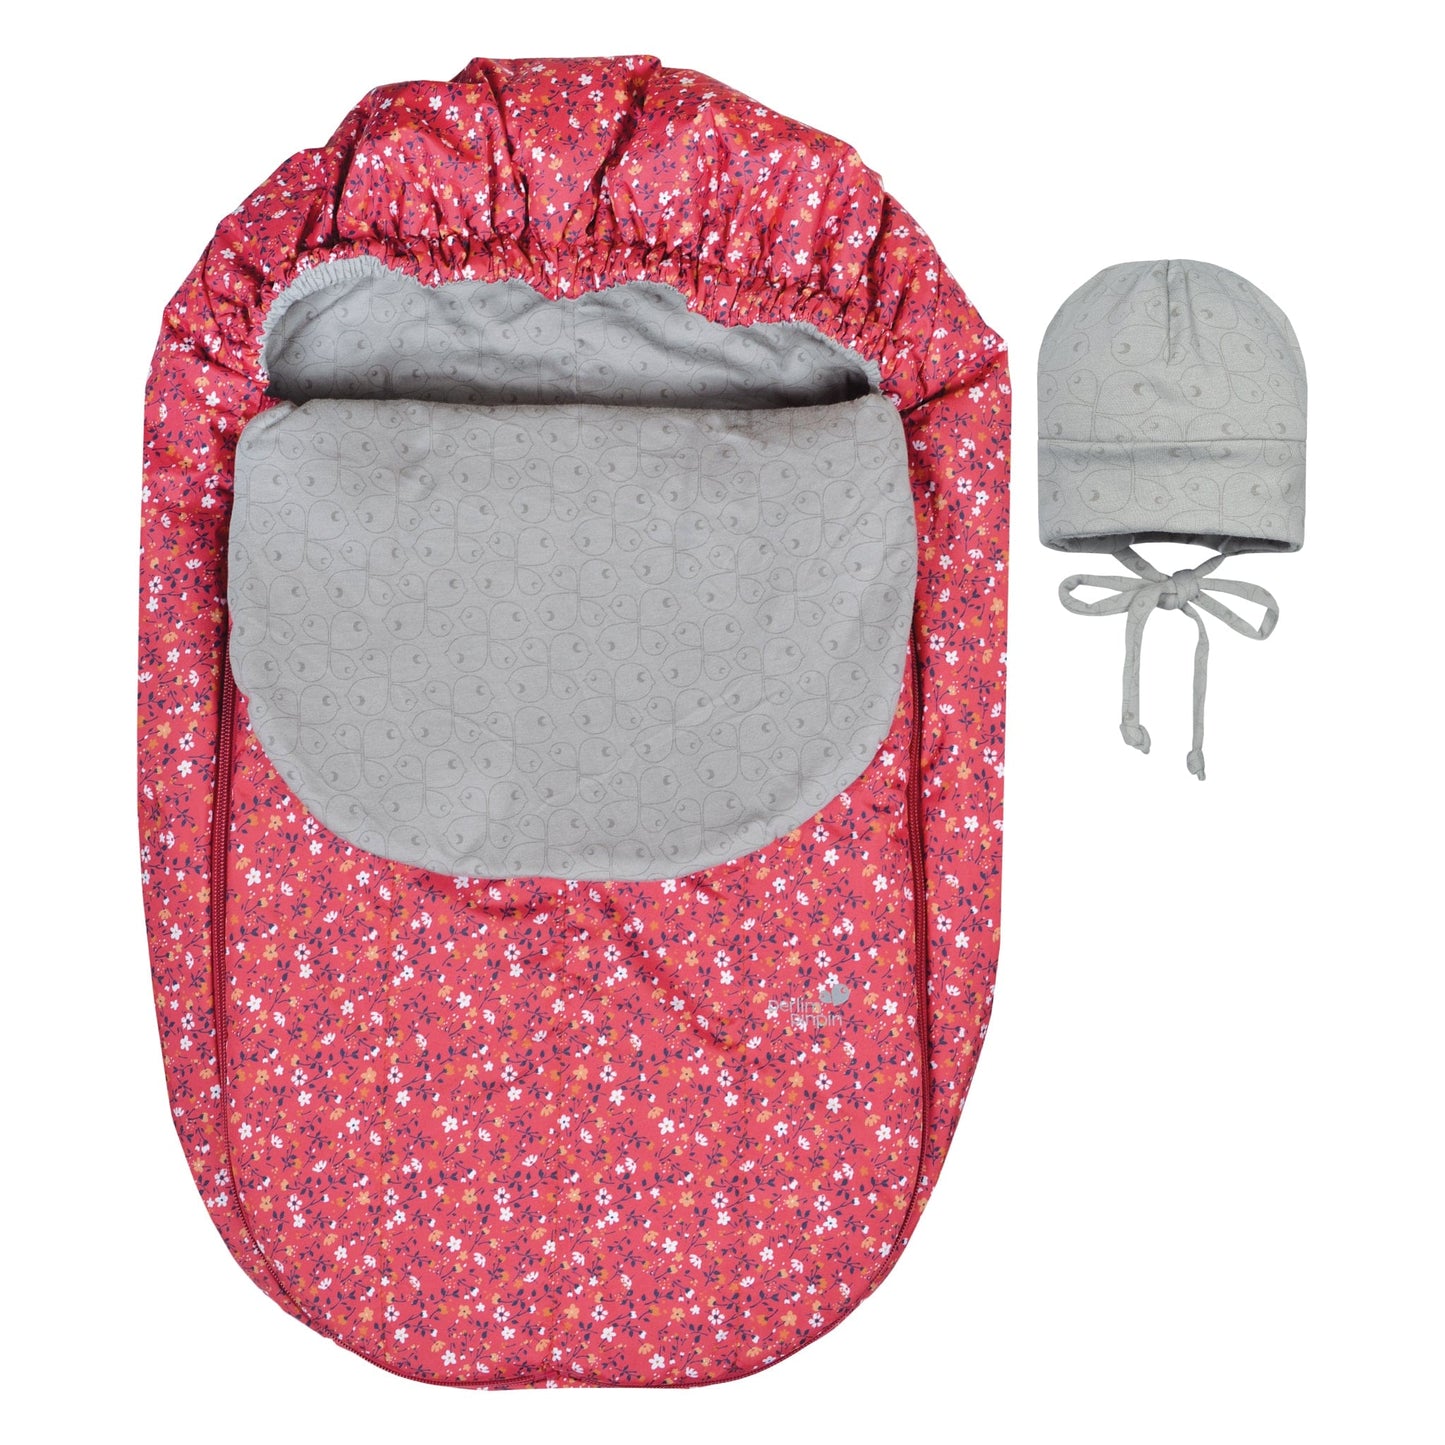 Mid-season car seat cover - Rose Floral